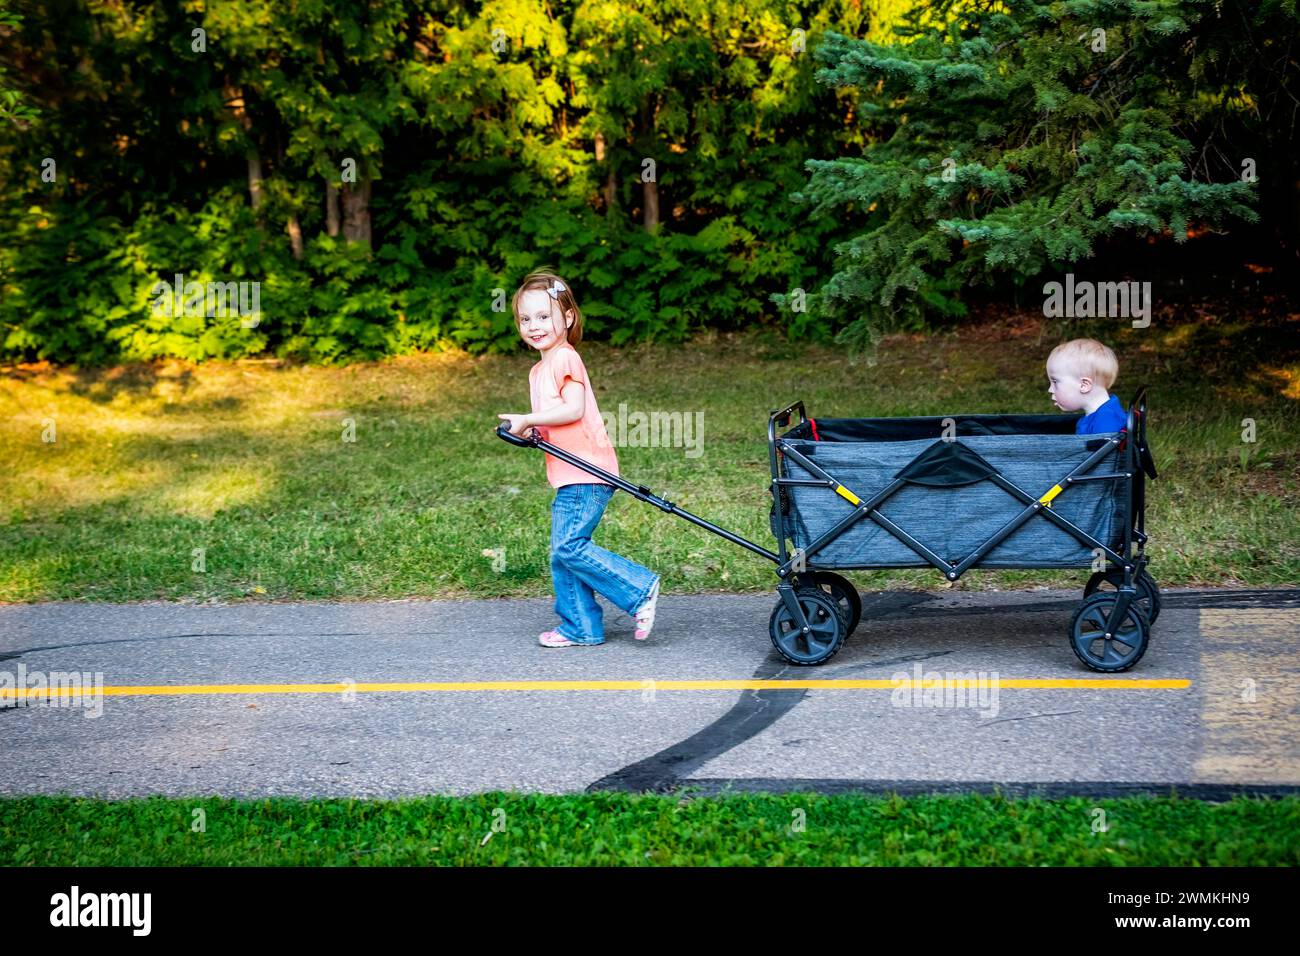 Preschooler girl pulling her younger brother who has Down syndrome in a wagon on a path at a city park during a warm fall evening Stock Photo